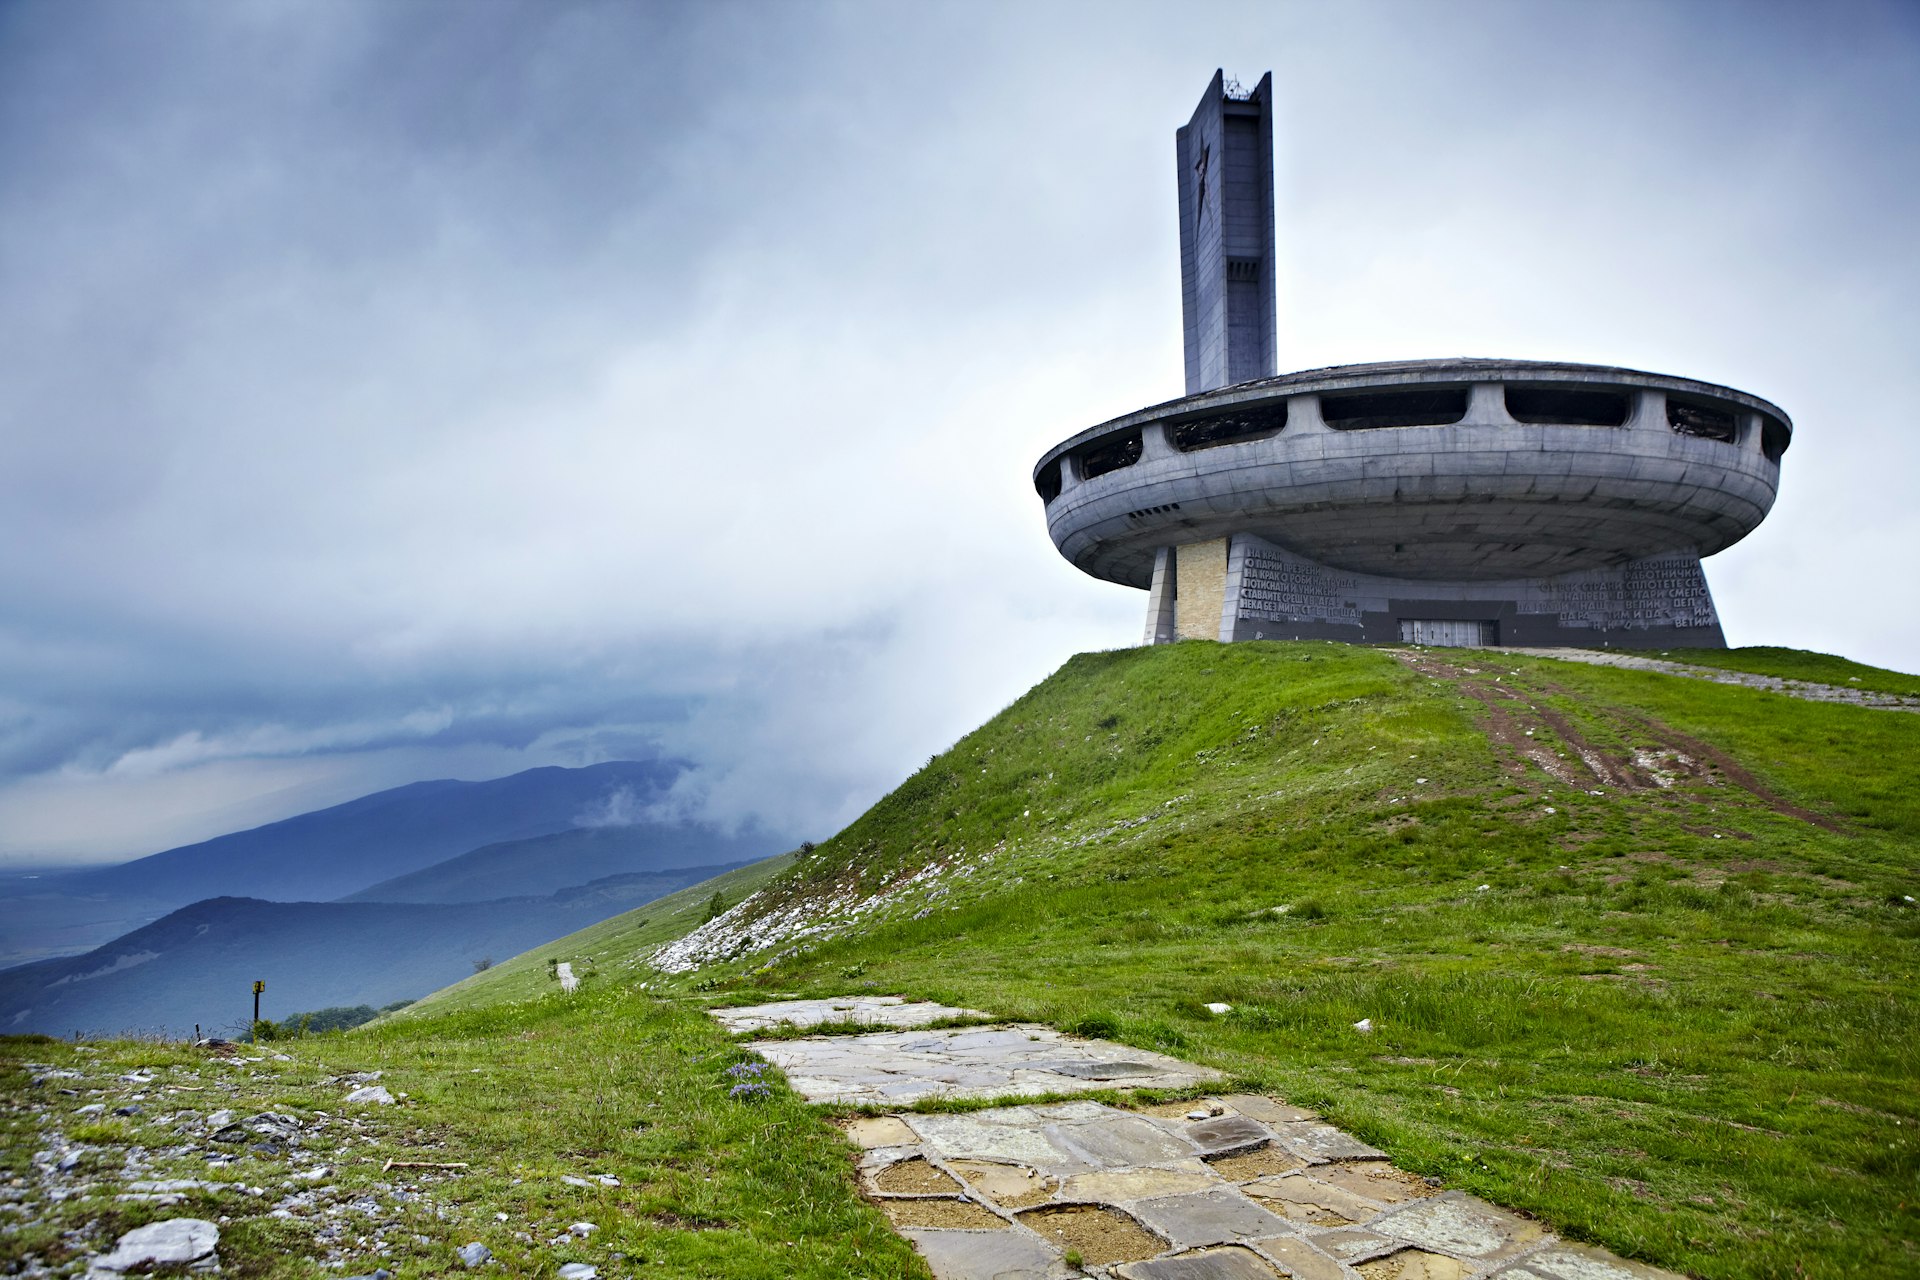 Situated on hill above Balkan Peninsula sits now derelict Buzludzha Monument.